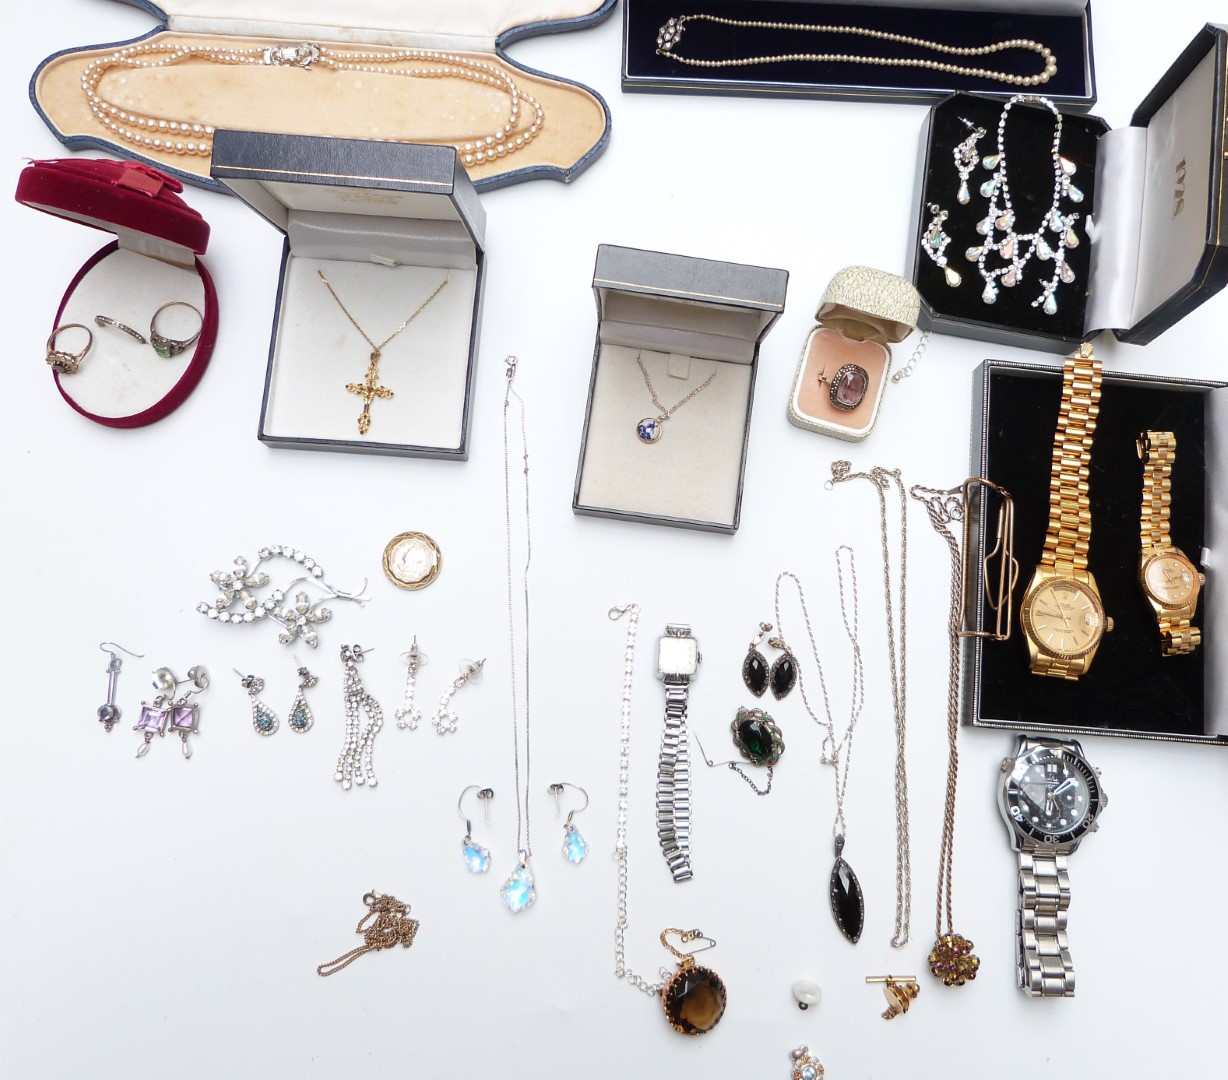 A collection of costume jewellery including silver earrings, silver chains and pendants, silver